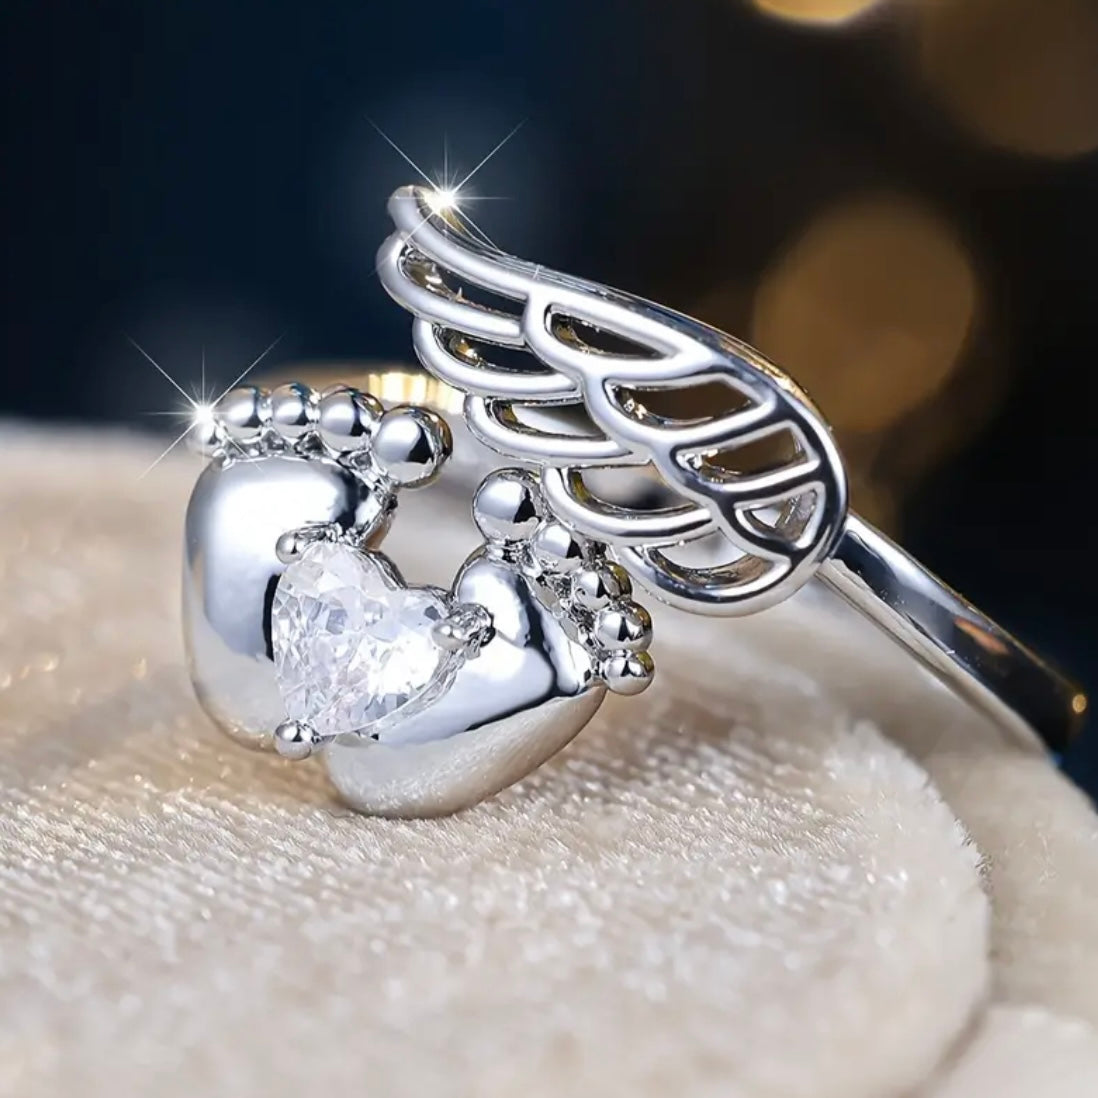 Angelic remembrance ring